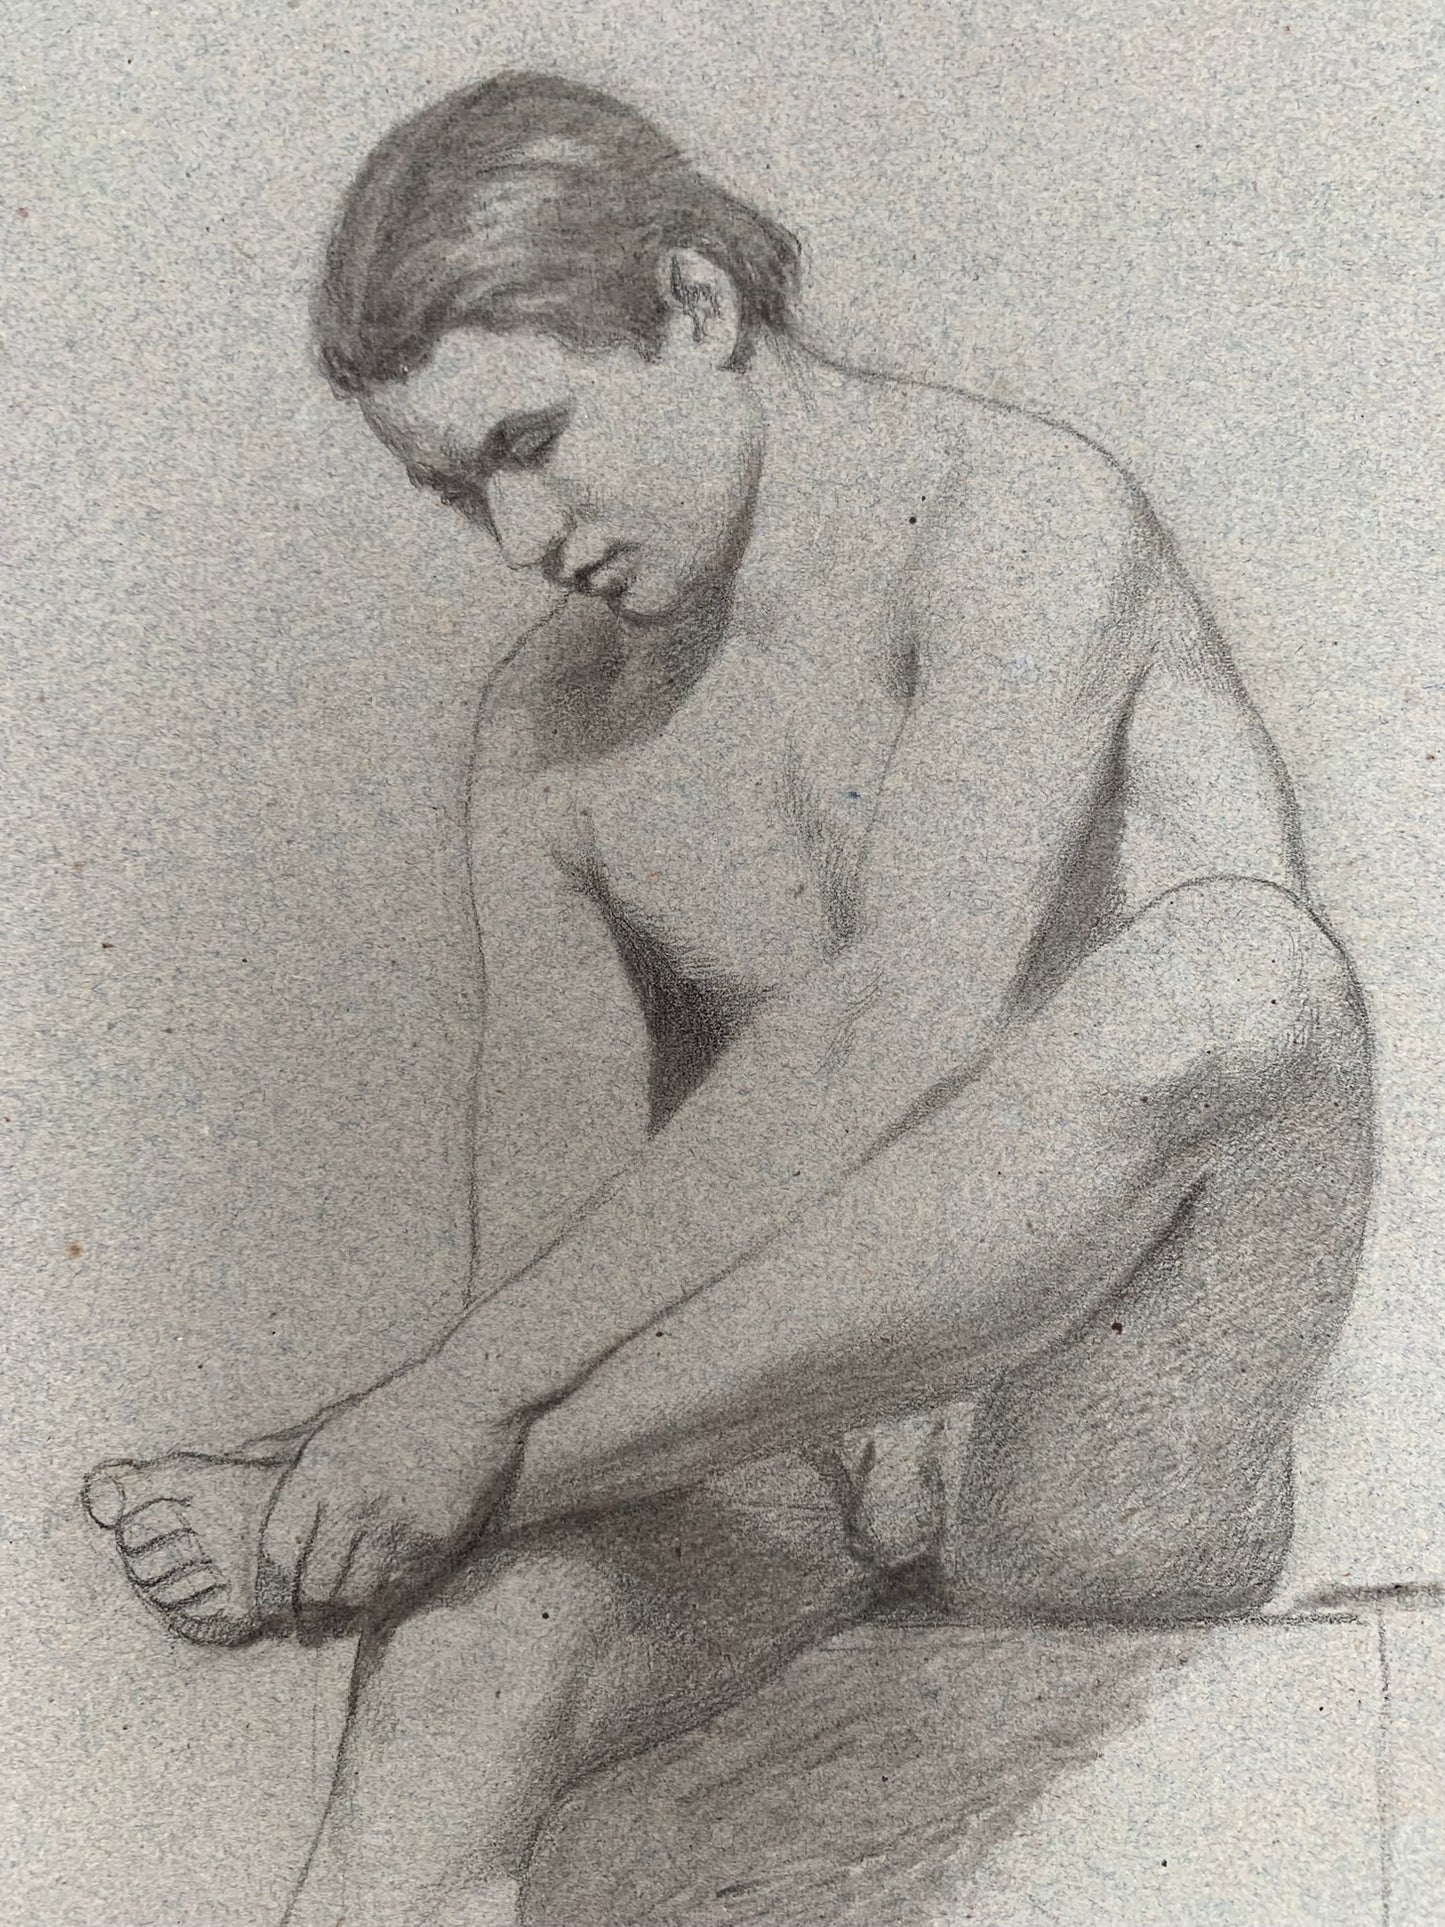 19th century Italian school drawing. Academic study of the figure of the young naked man.